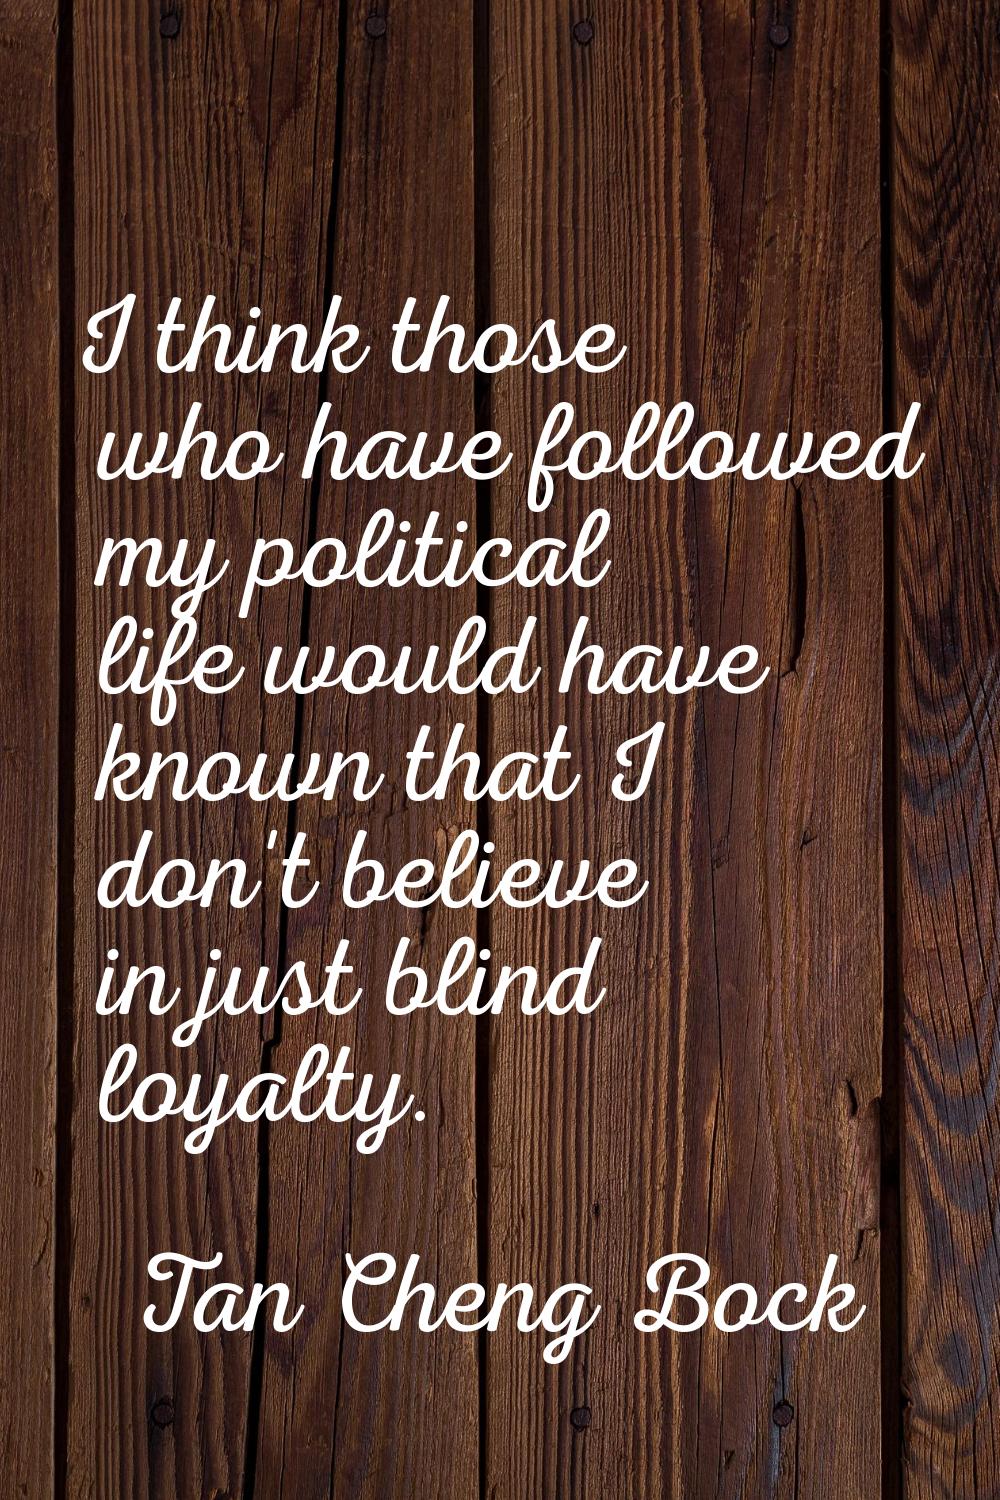 I think those who have followed my political life would have known that I don't believe in just bli